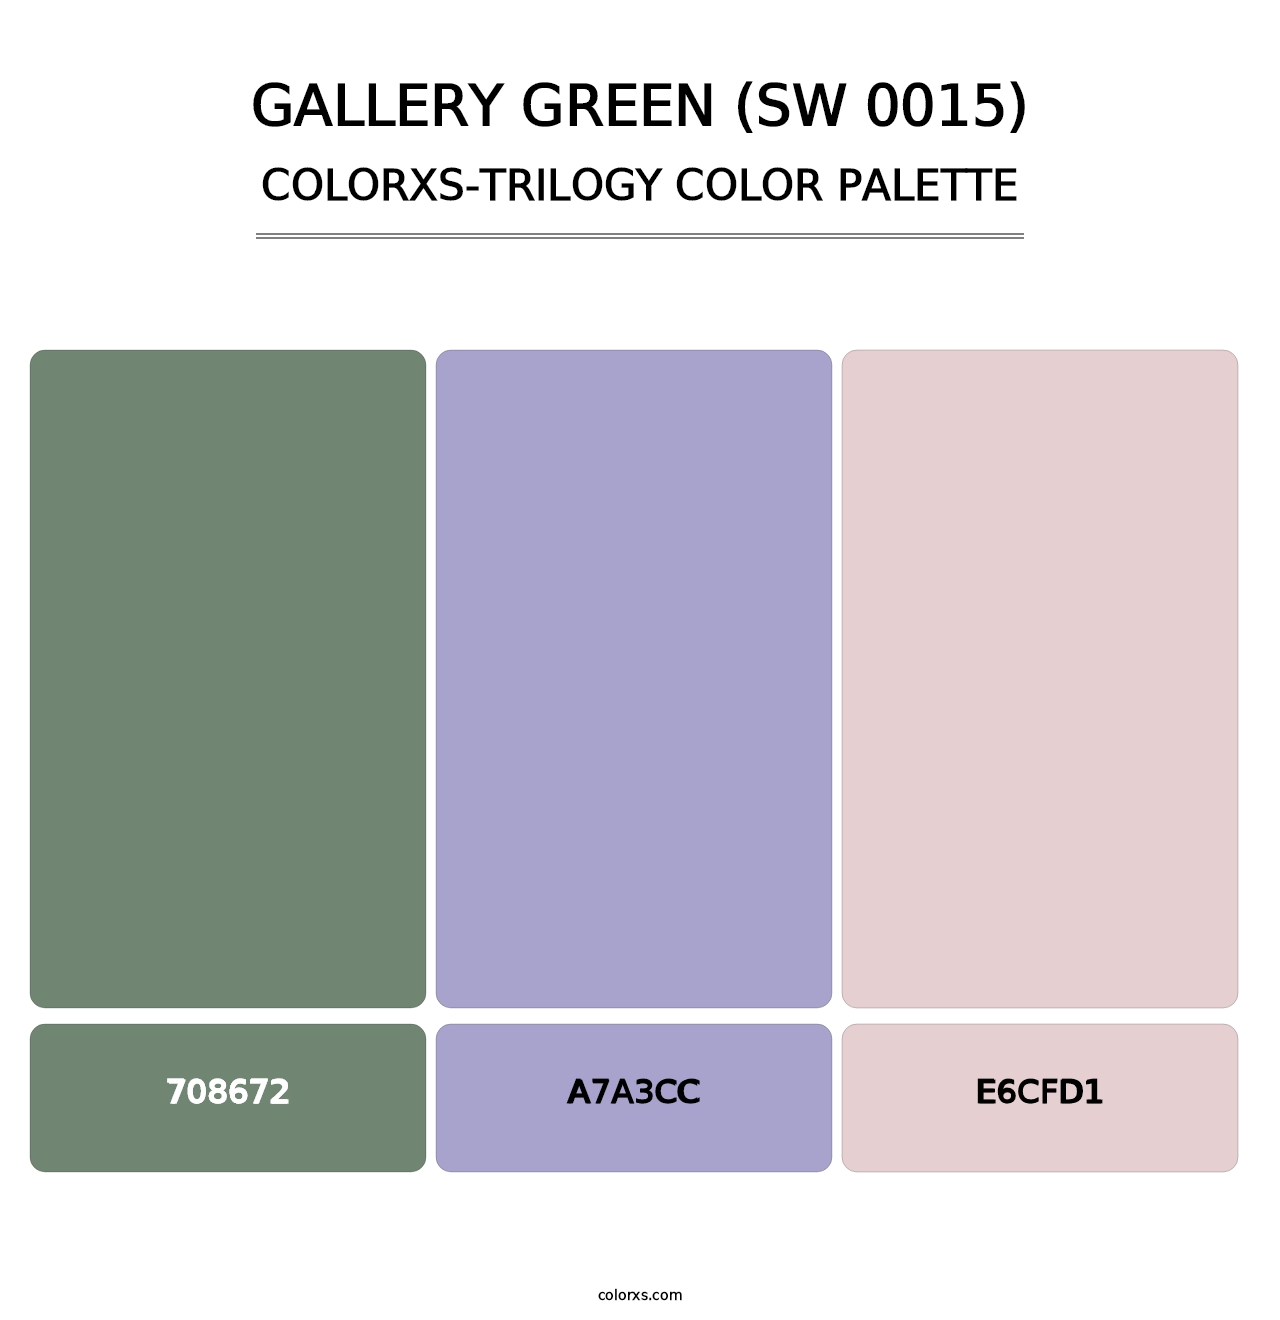 Gallery Green (SW 0015) - Colorxs Trilogy Palette